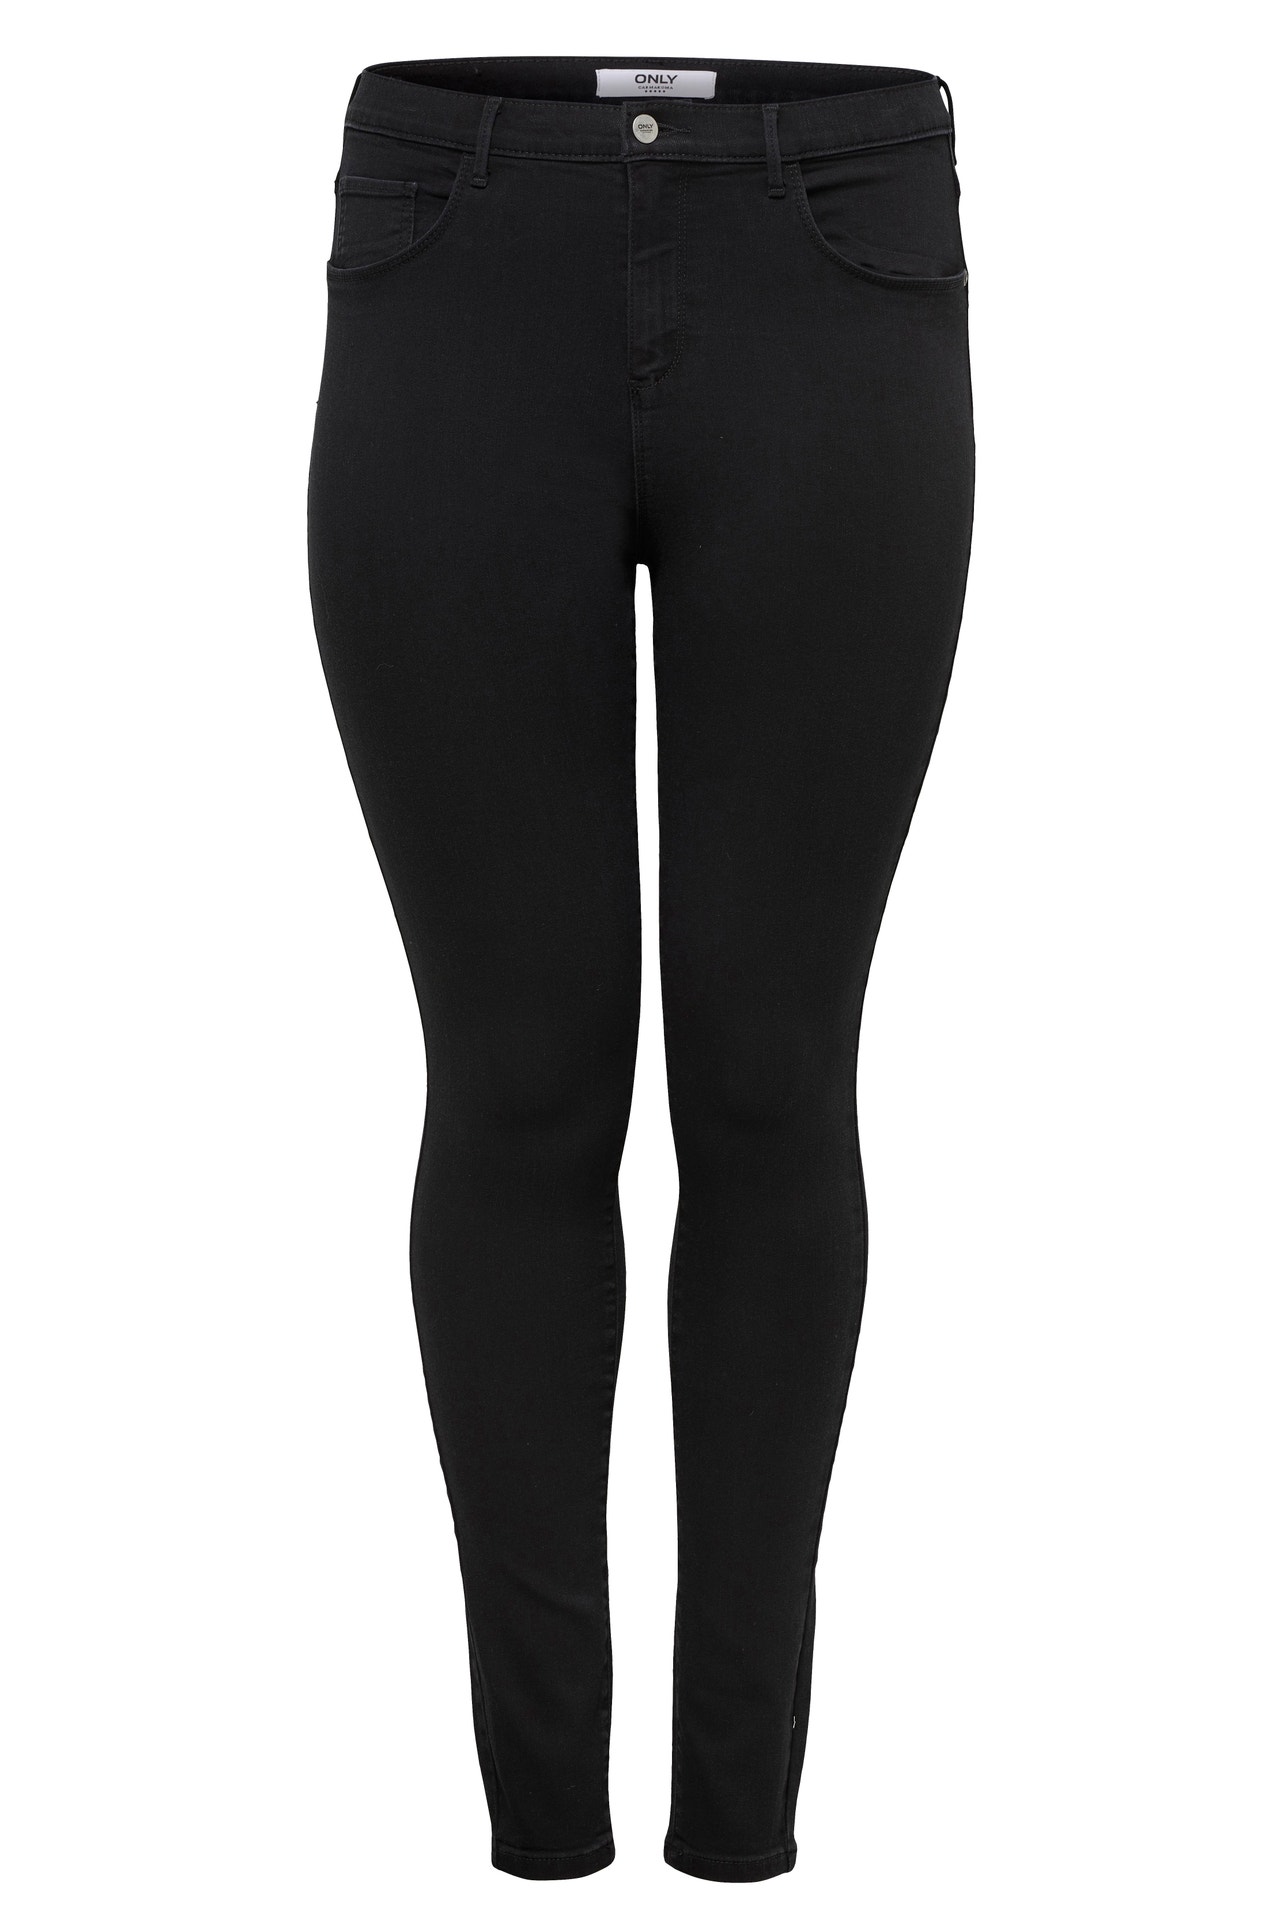 ONLY Jeans Skinny Fit Taille haute -Black - 15174946